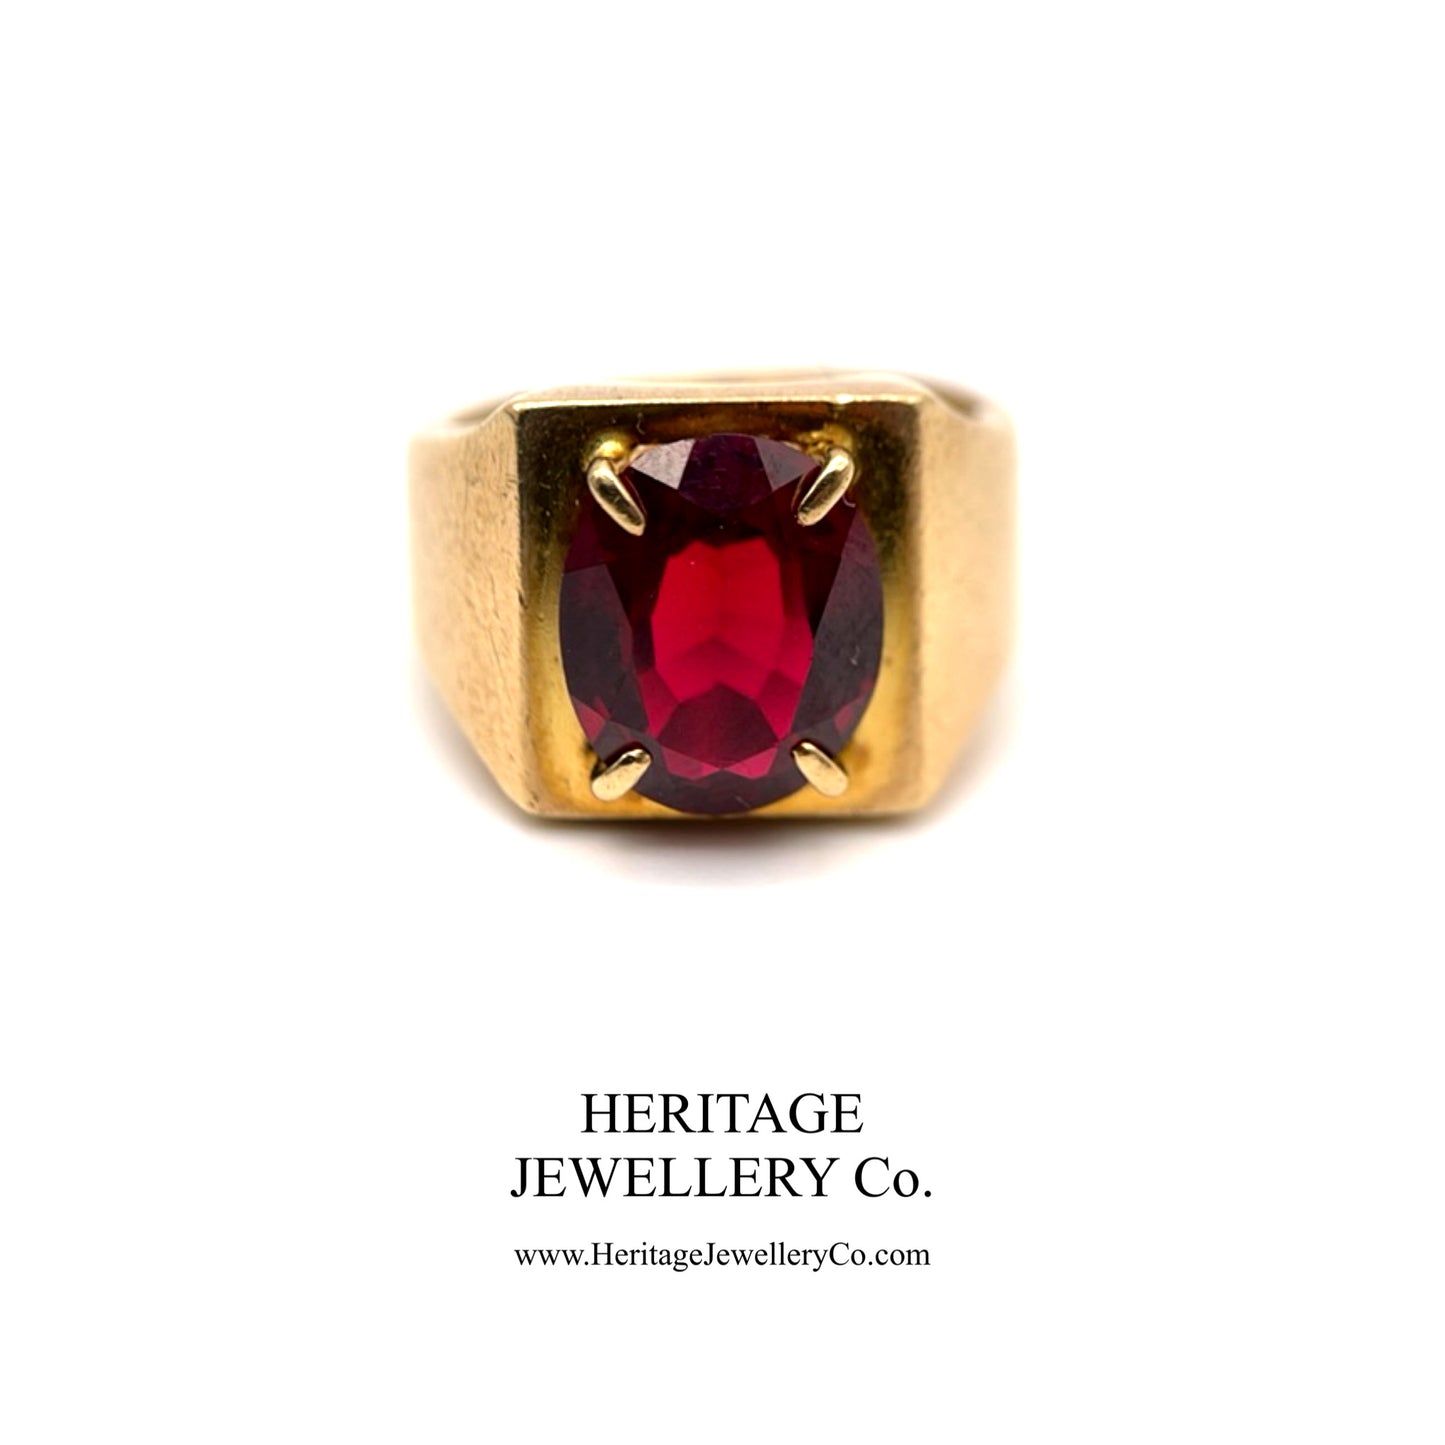 Antique Period Signet Ring with Fire Garnet (9ct Gold)